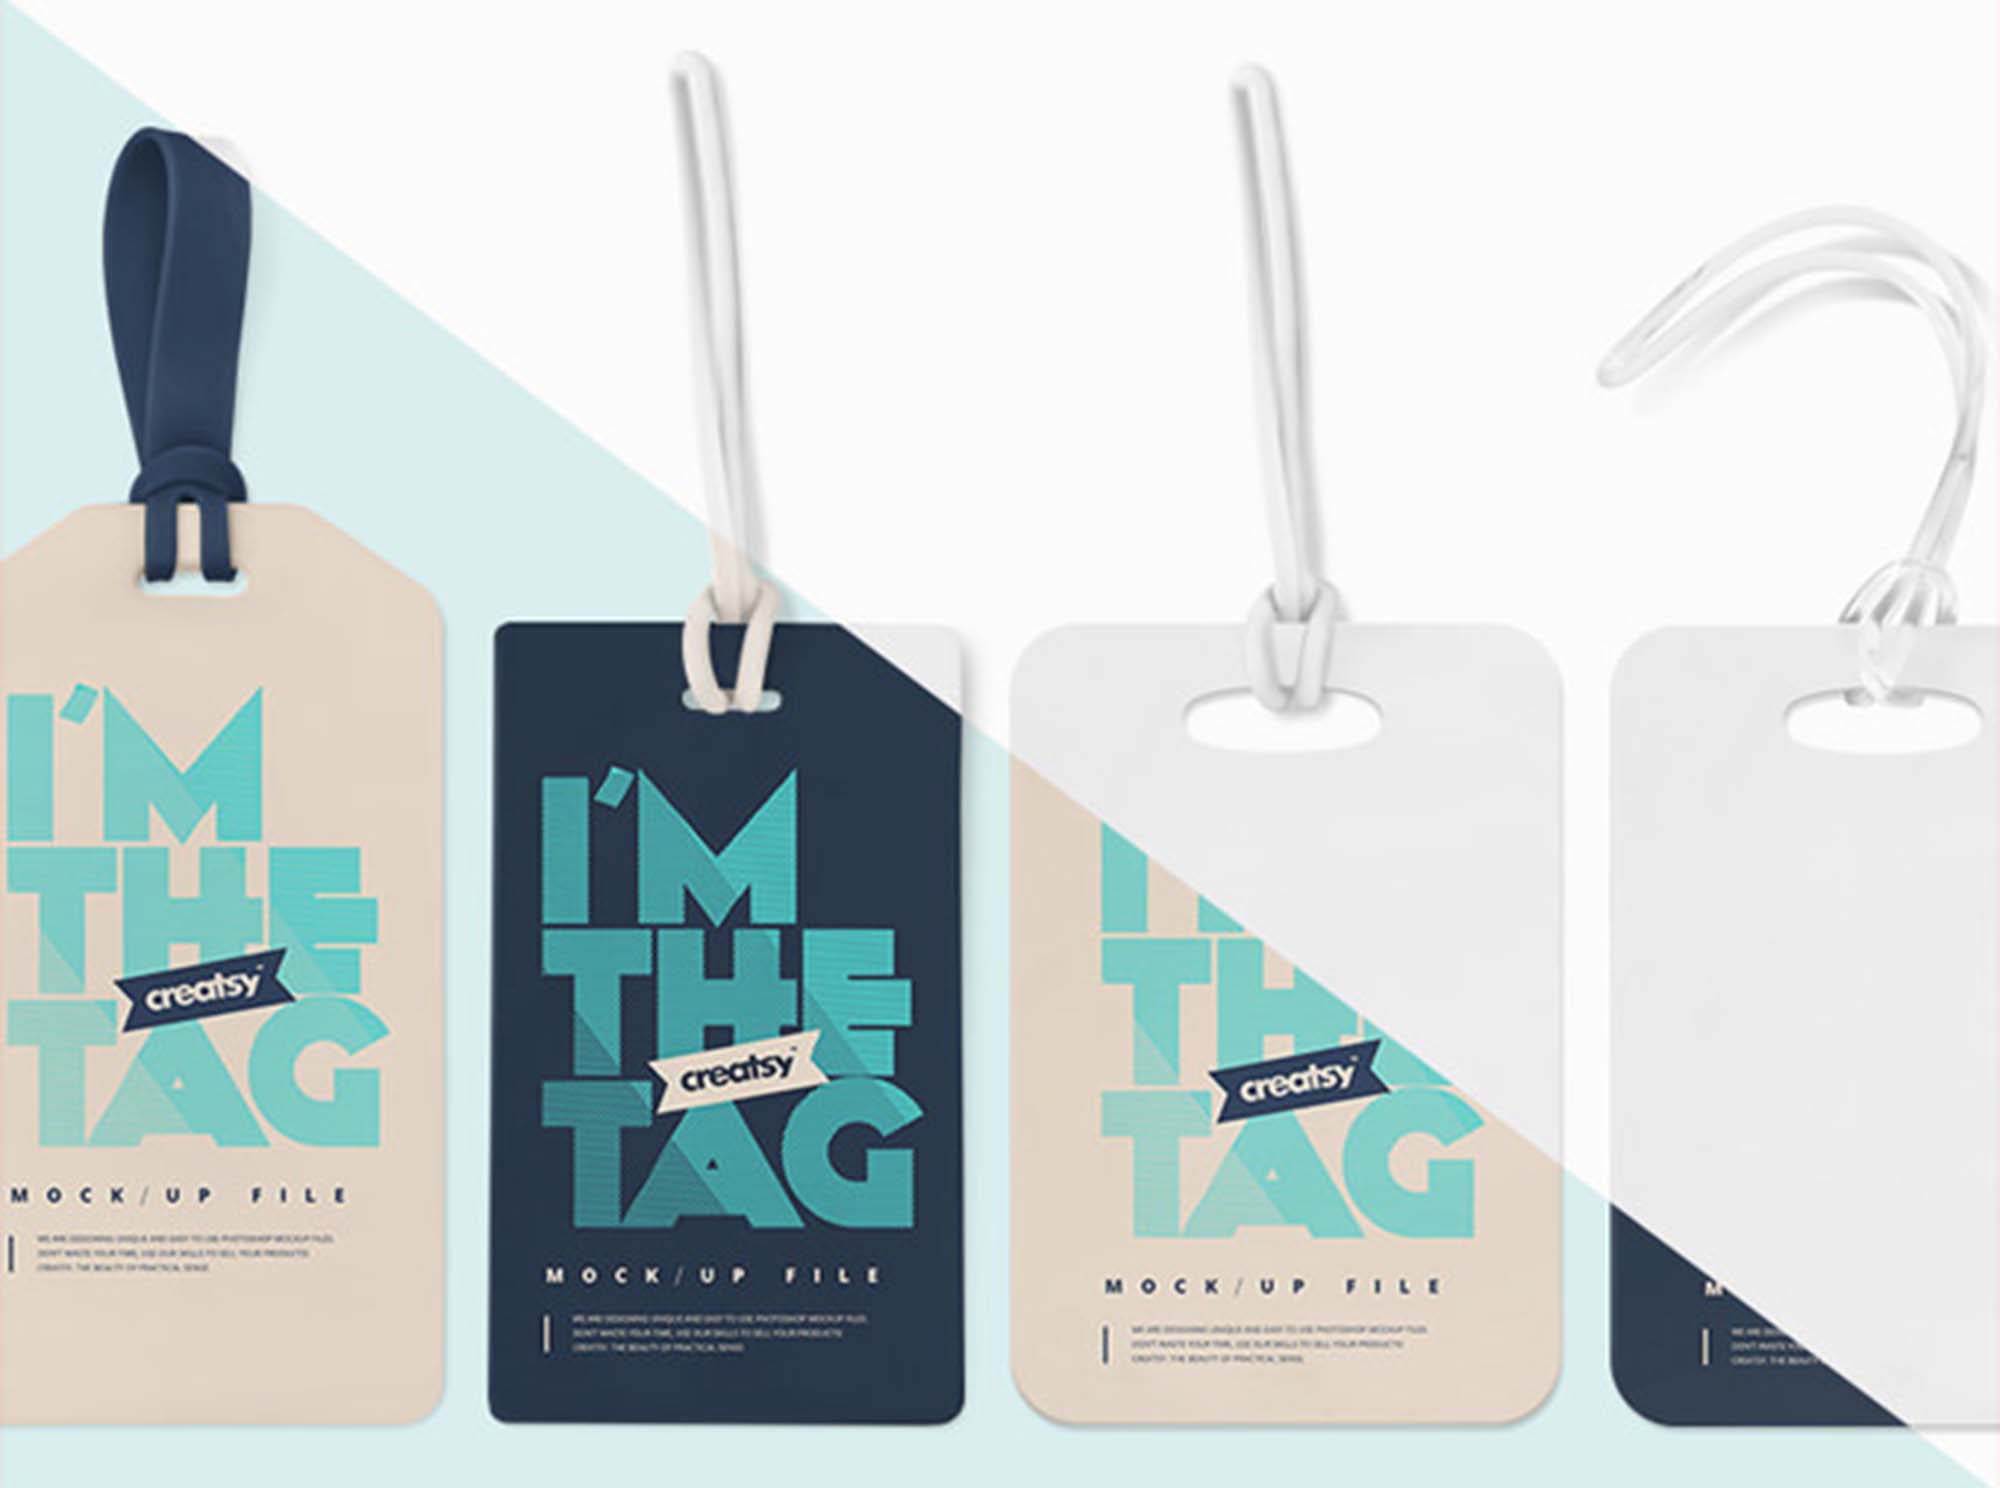 Luggage Tag PSD Mockups (Free) by Graphic Pear